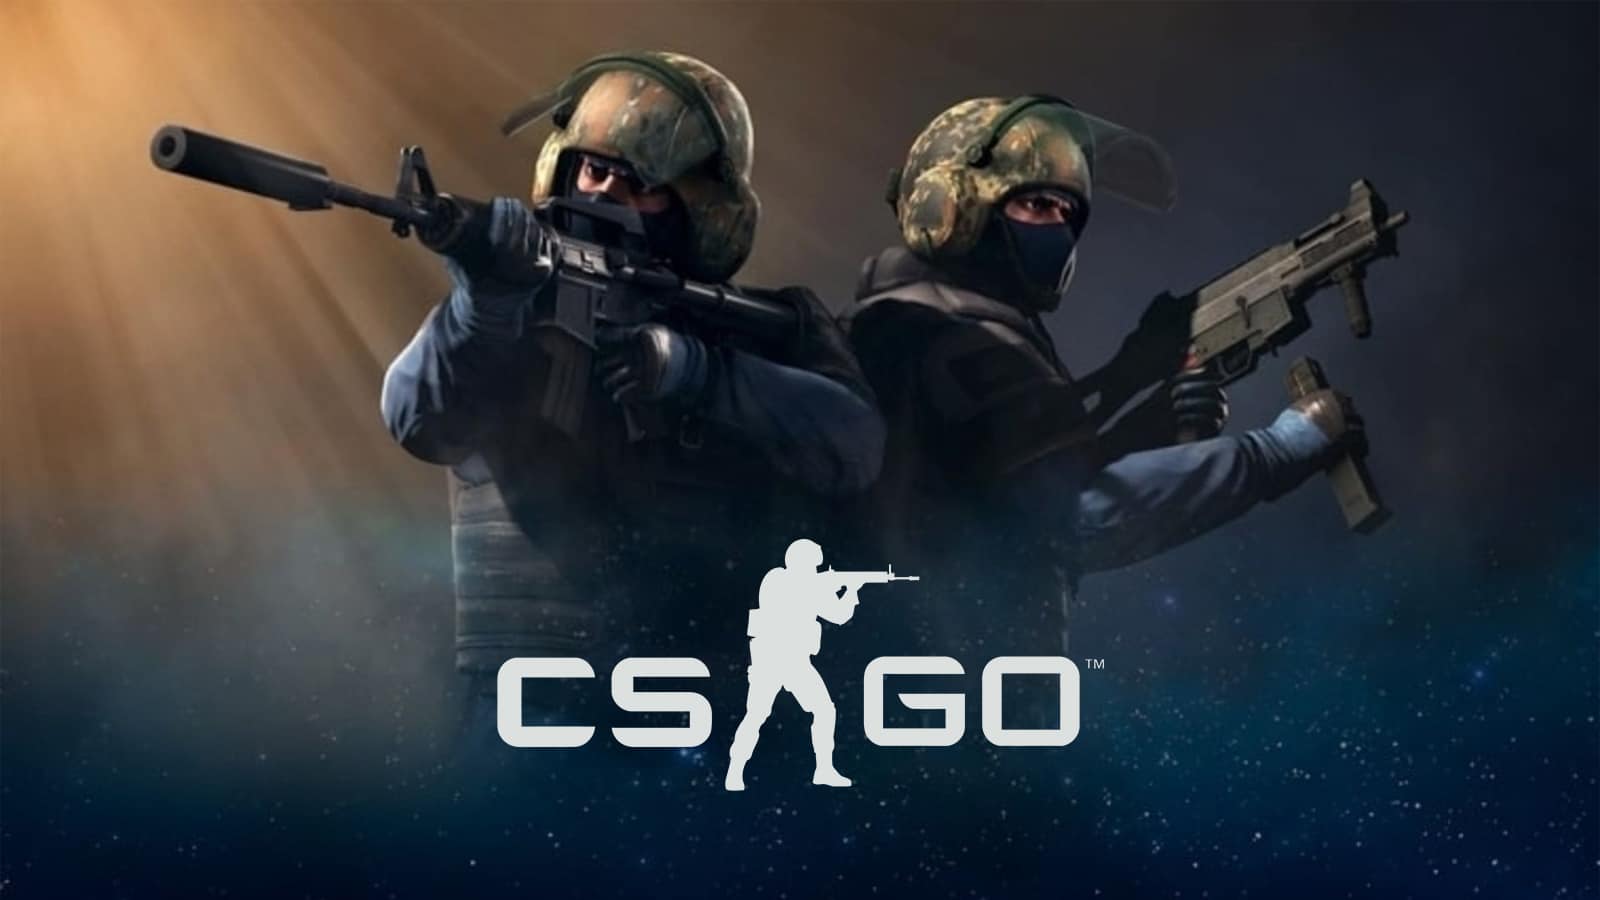 Which Country Has The Largest Portion of the CSGO Player Base?